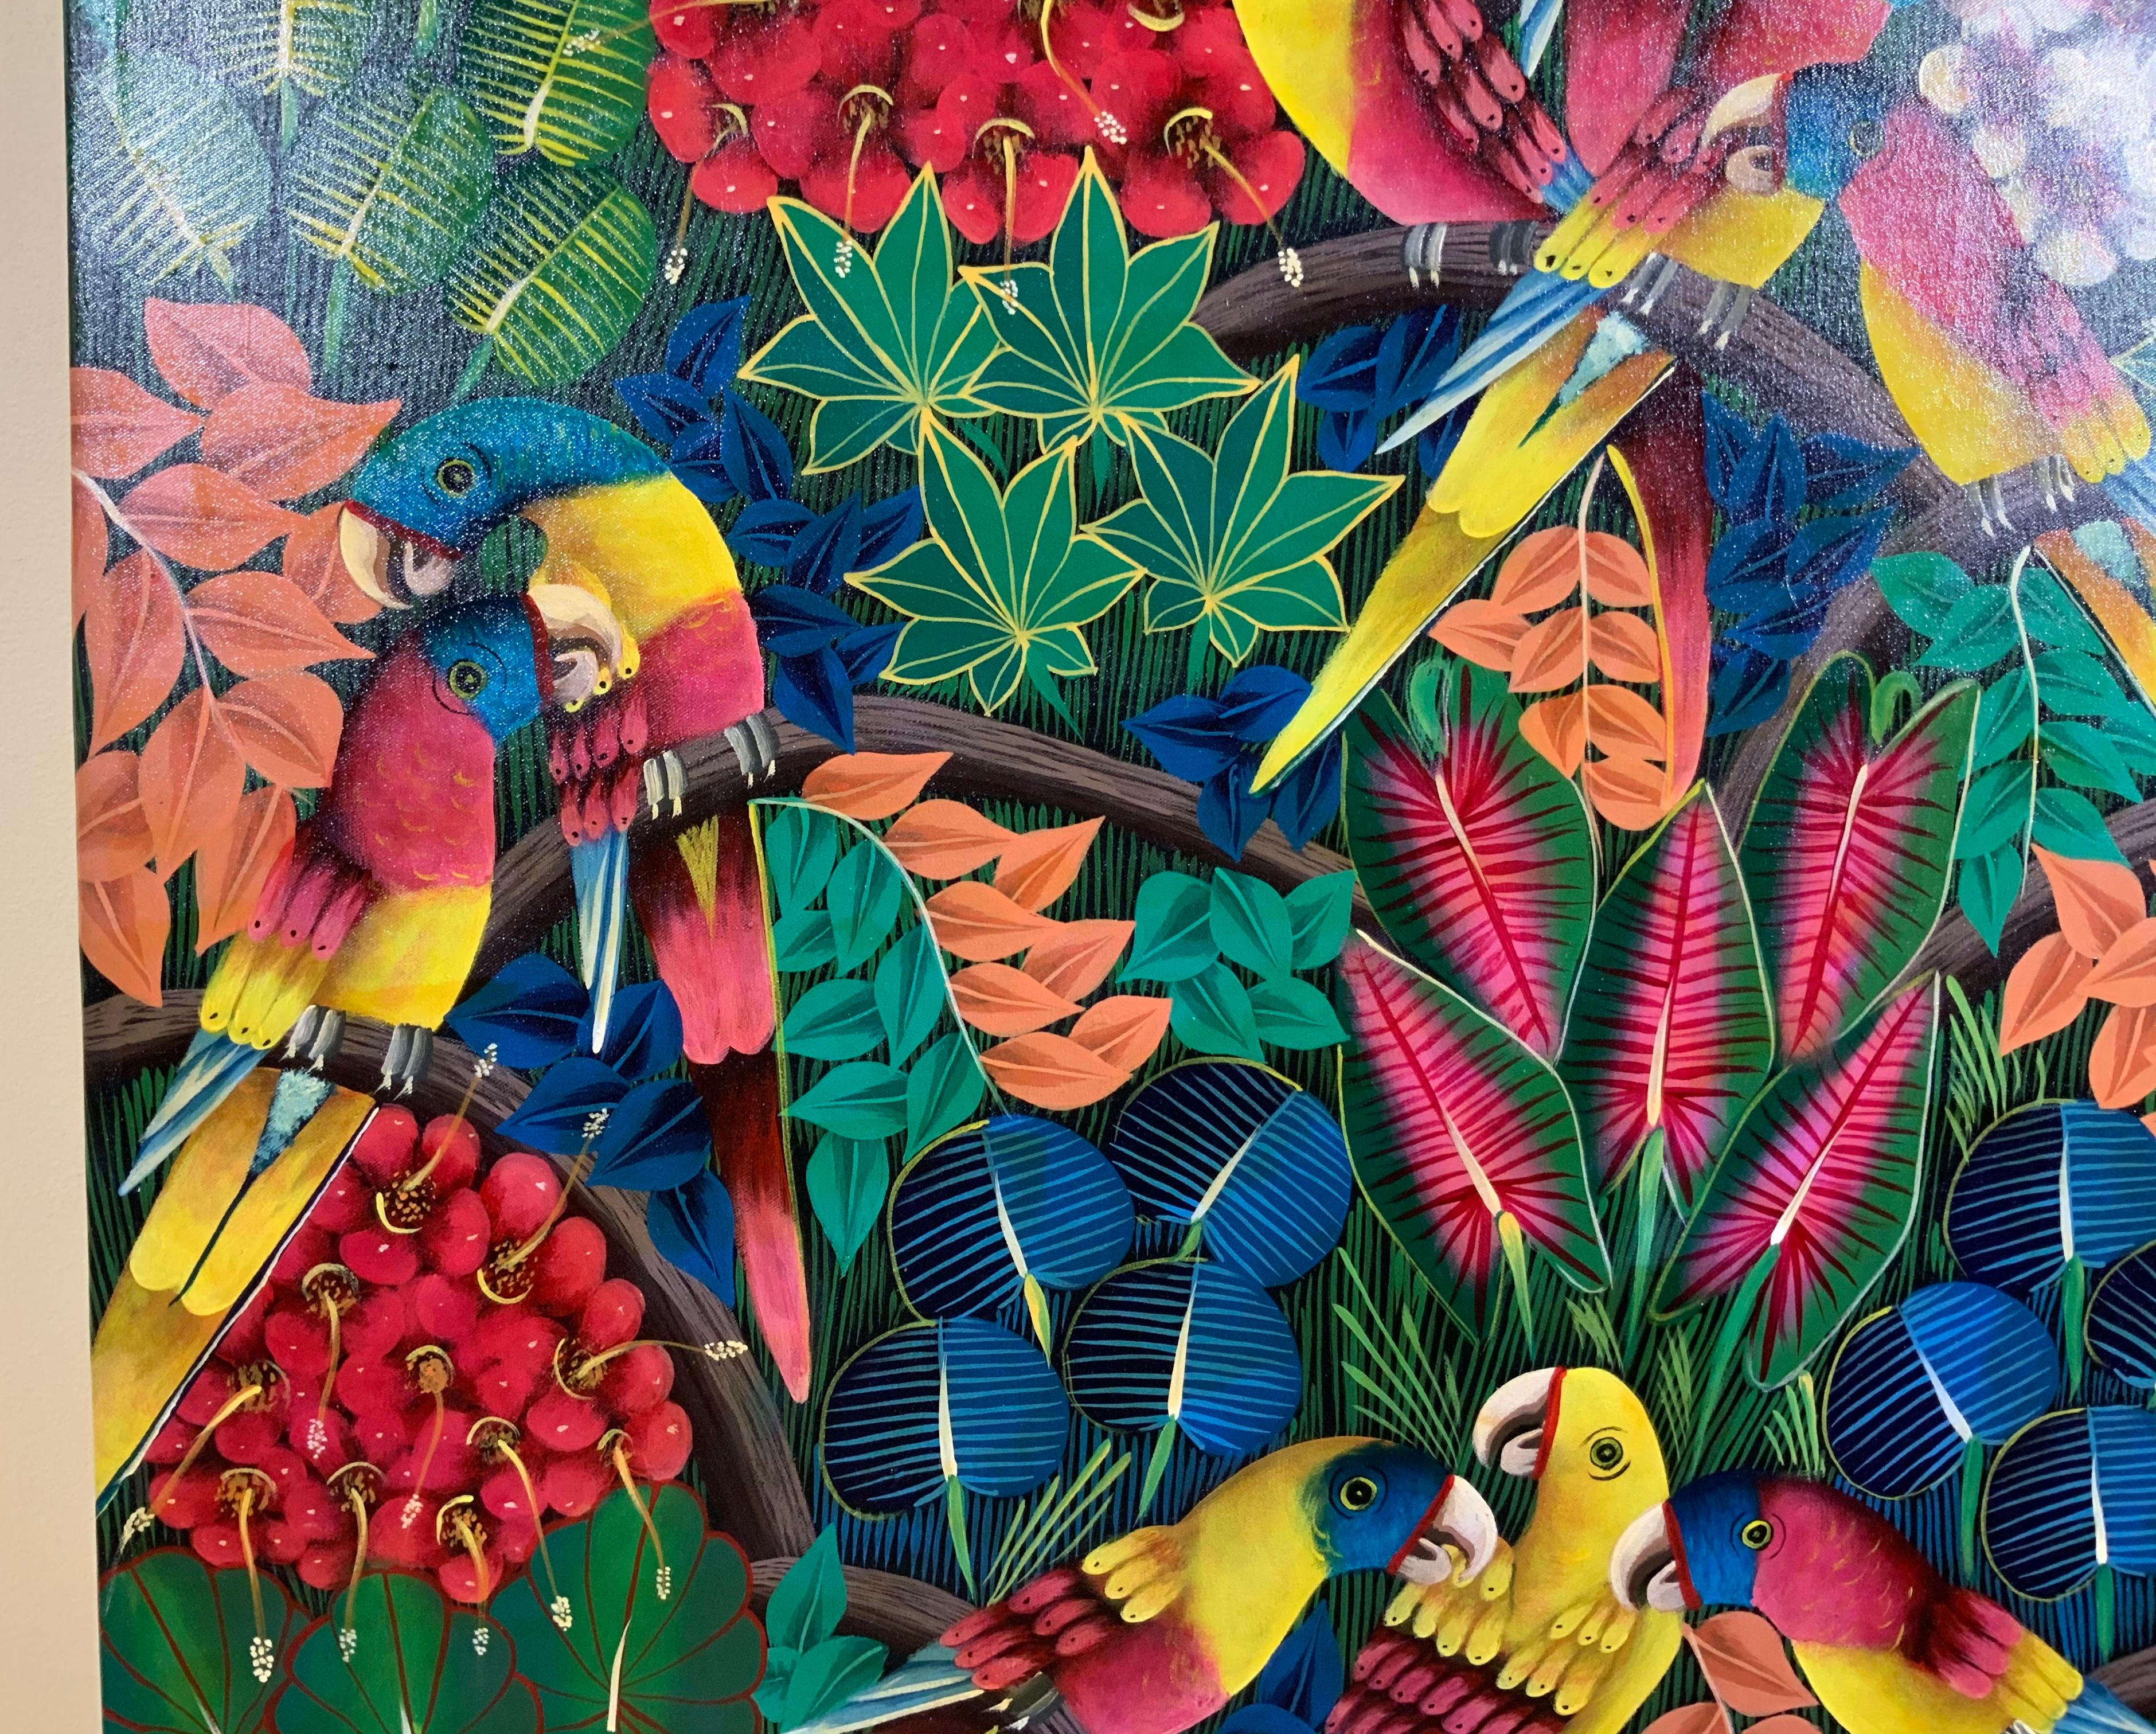 Large Parrots in the Jungle, Haitian Acrylic Painting on Canvas 2